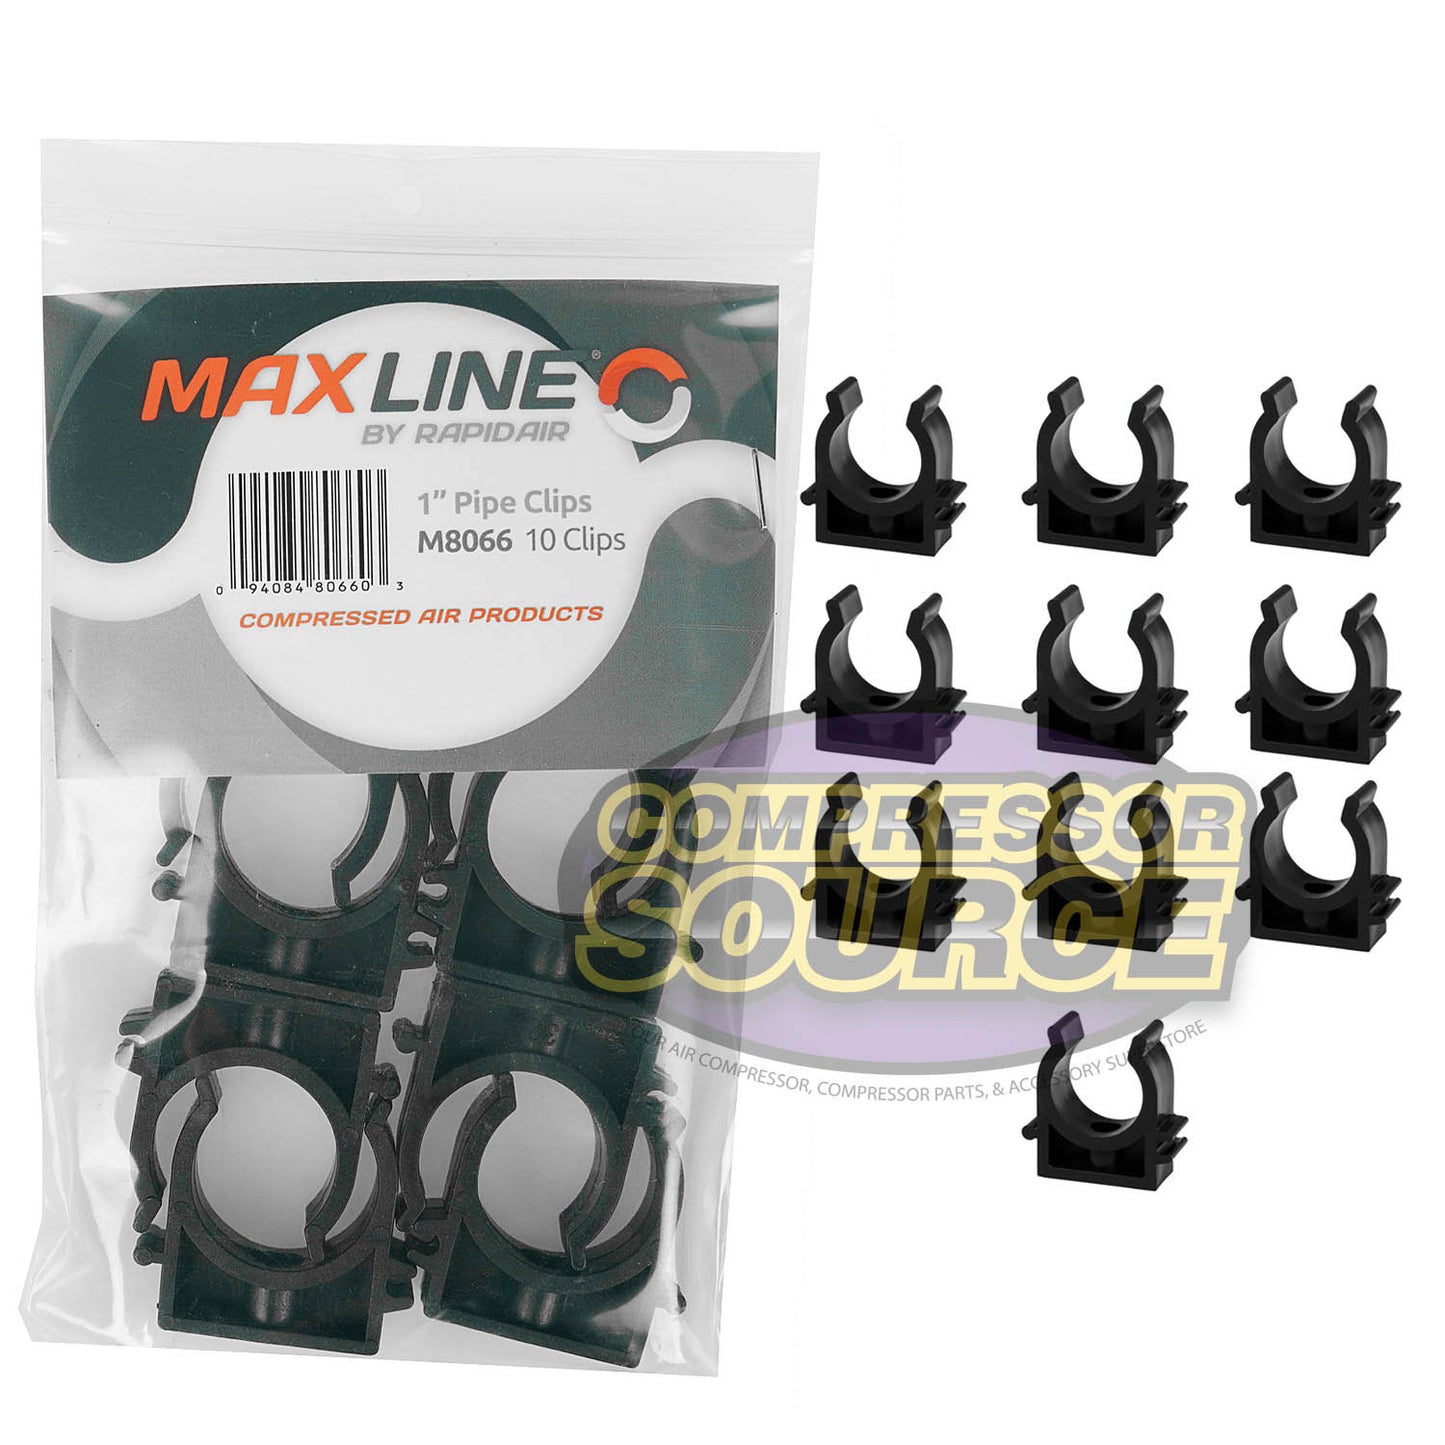 RapidAir Maxline 1" Compressed Air Tubing Wall Mount Clips 10pc. M8066